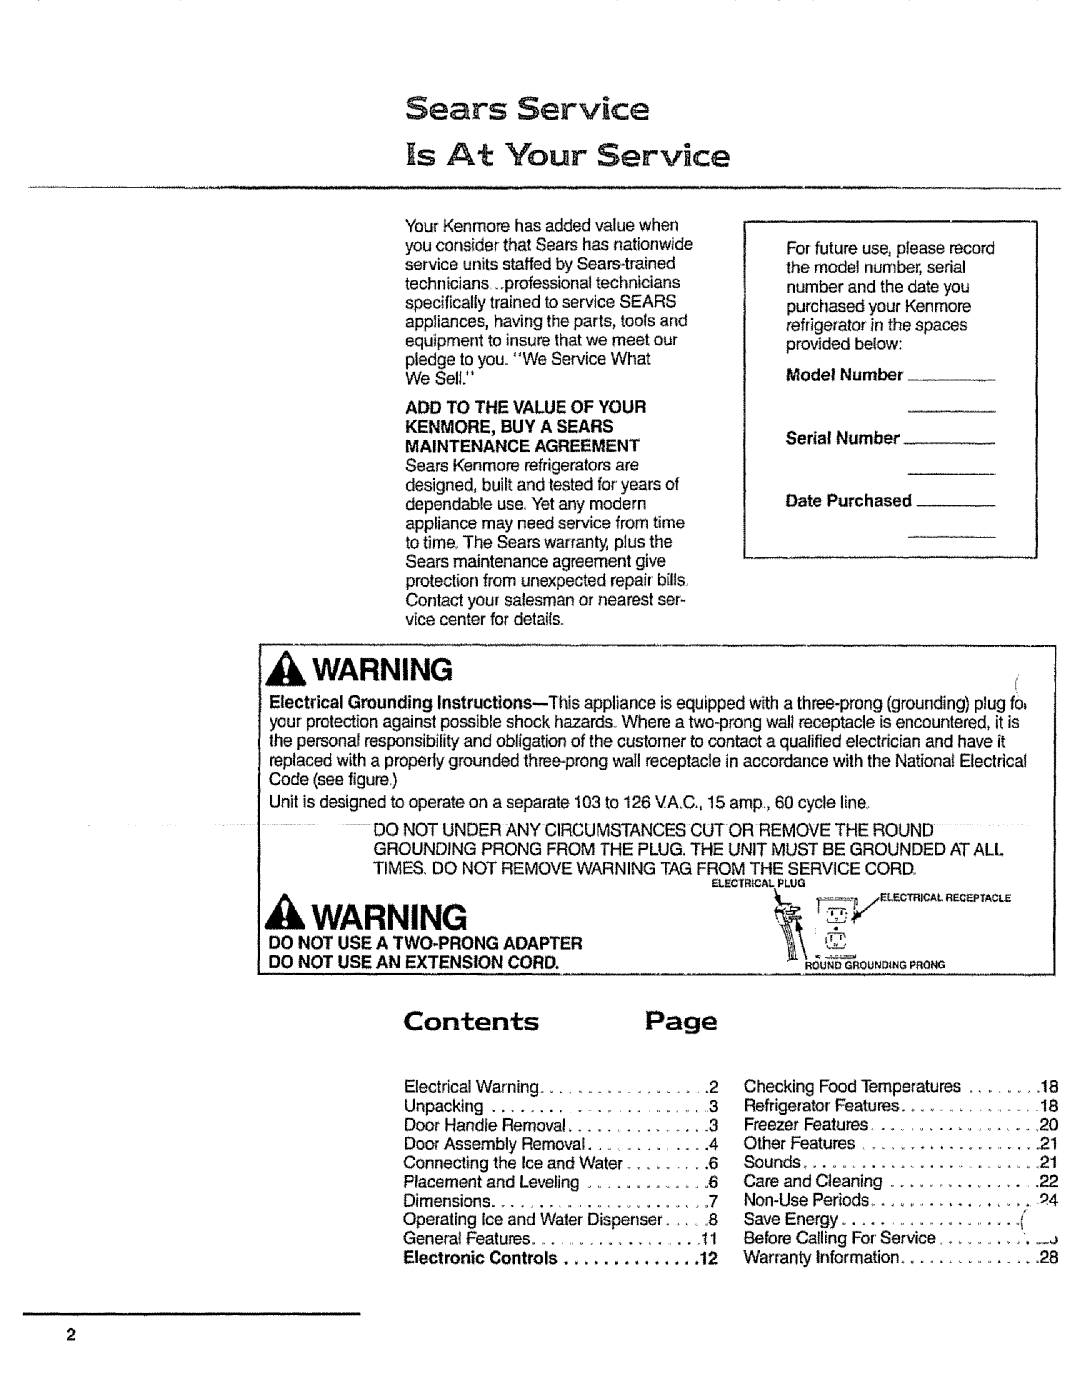 Sears 10062603 WARNING r, ts At Your Service, Sears Service, Contents, Page, Add To The Value Of Your, Model Number, Cord 